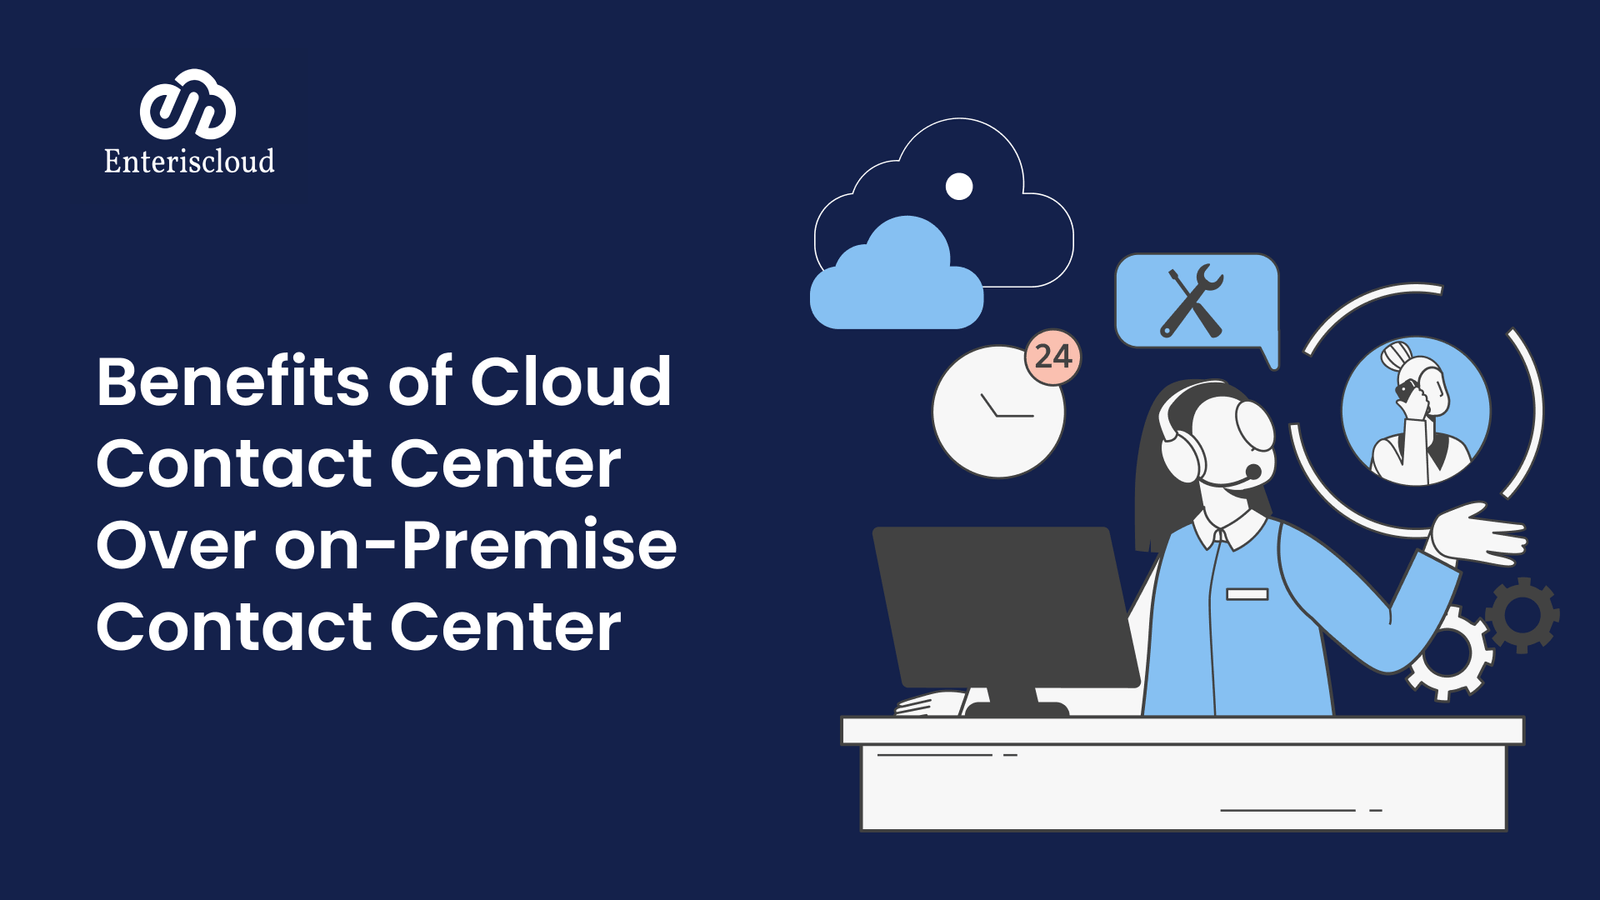 Benefits of Cloud Contact Center Over on-Premise Contact Center